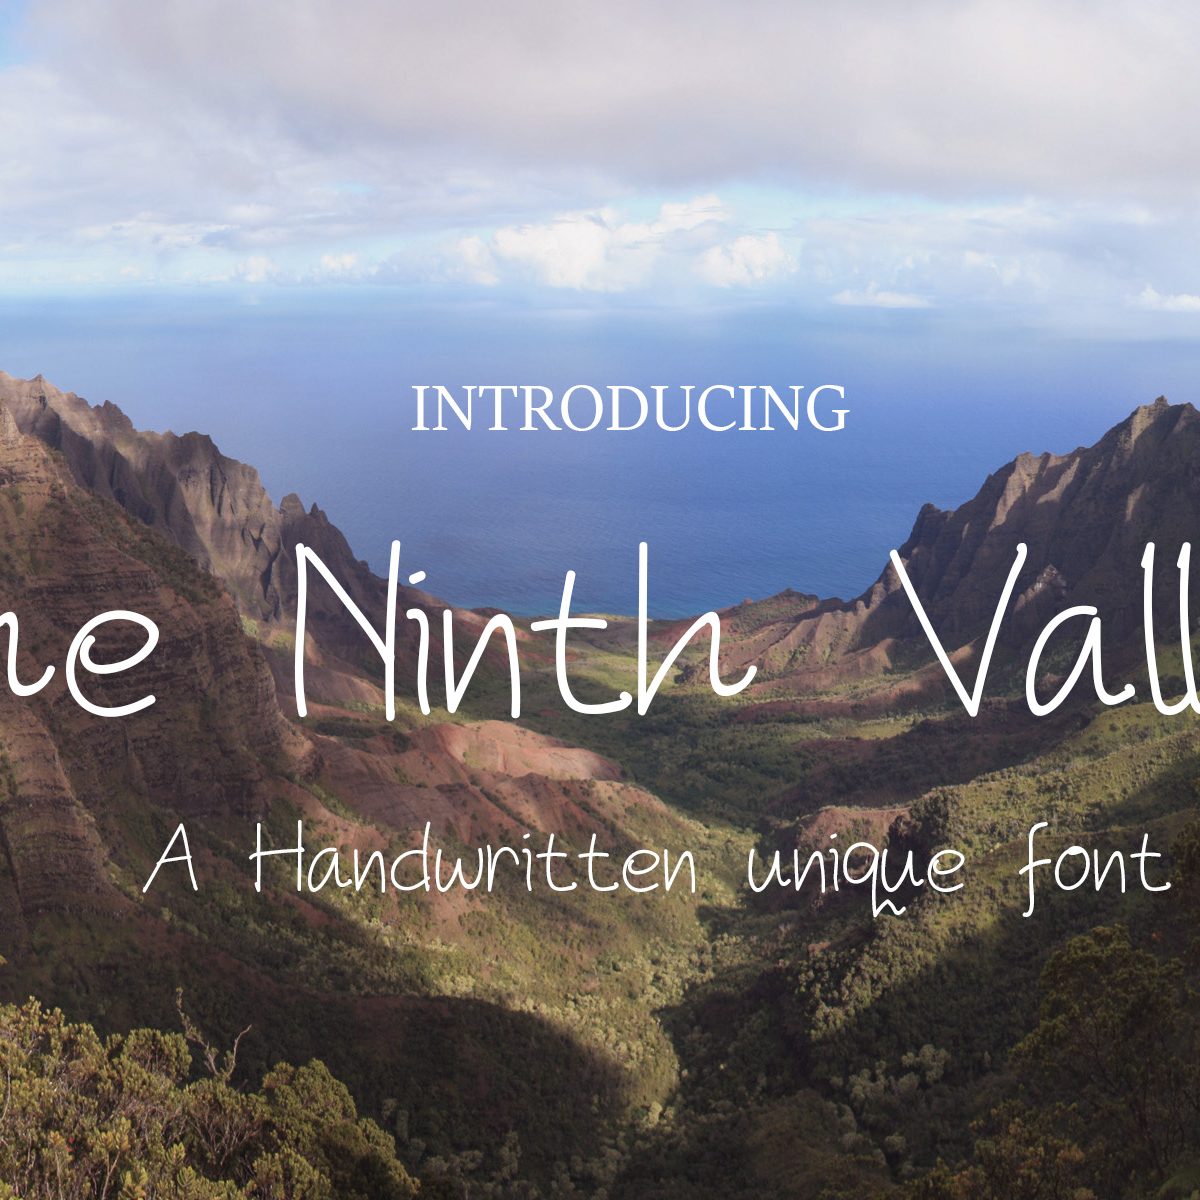 The Ninth Valley Other Font16设计网精选英文字体